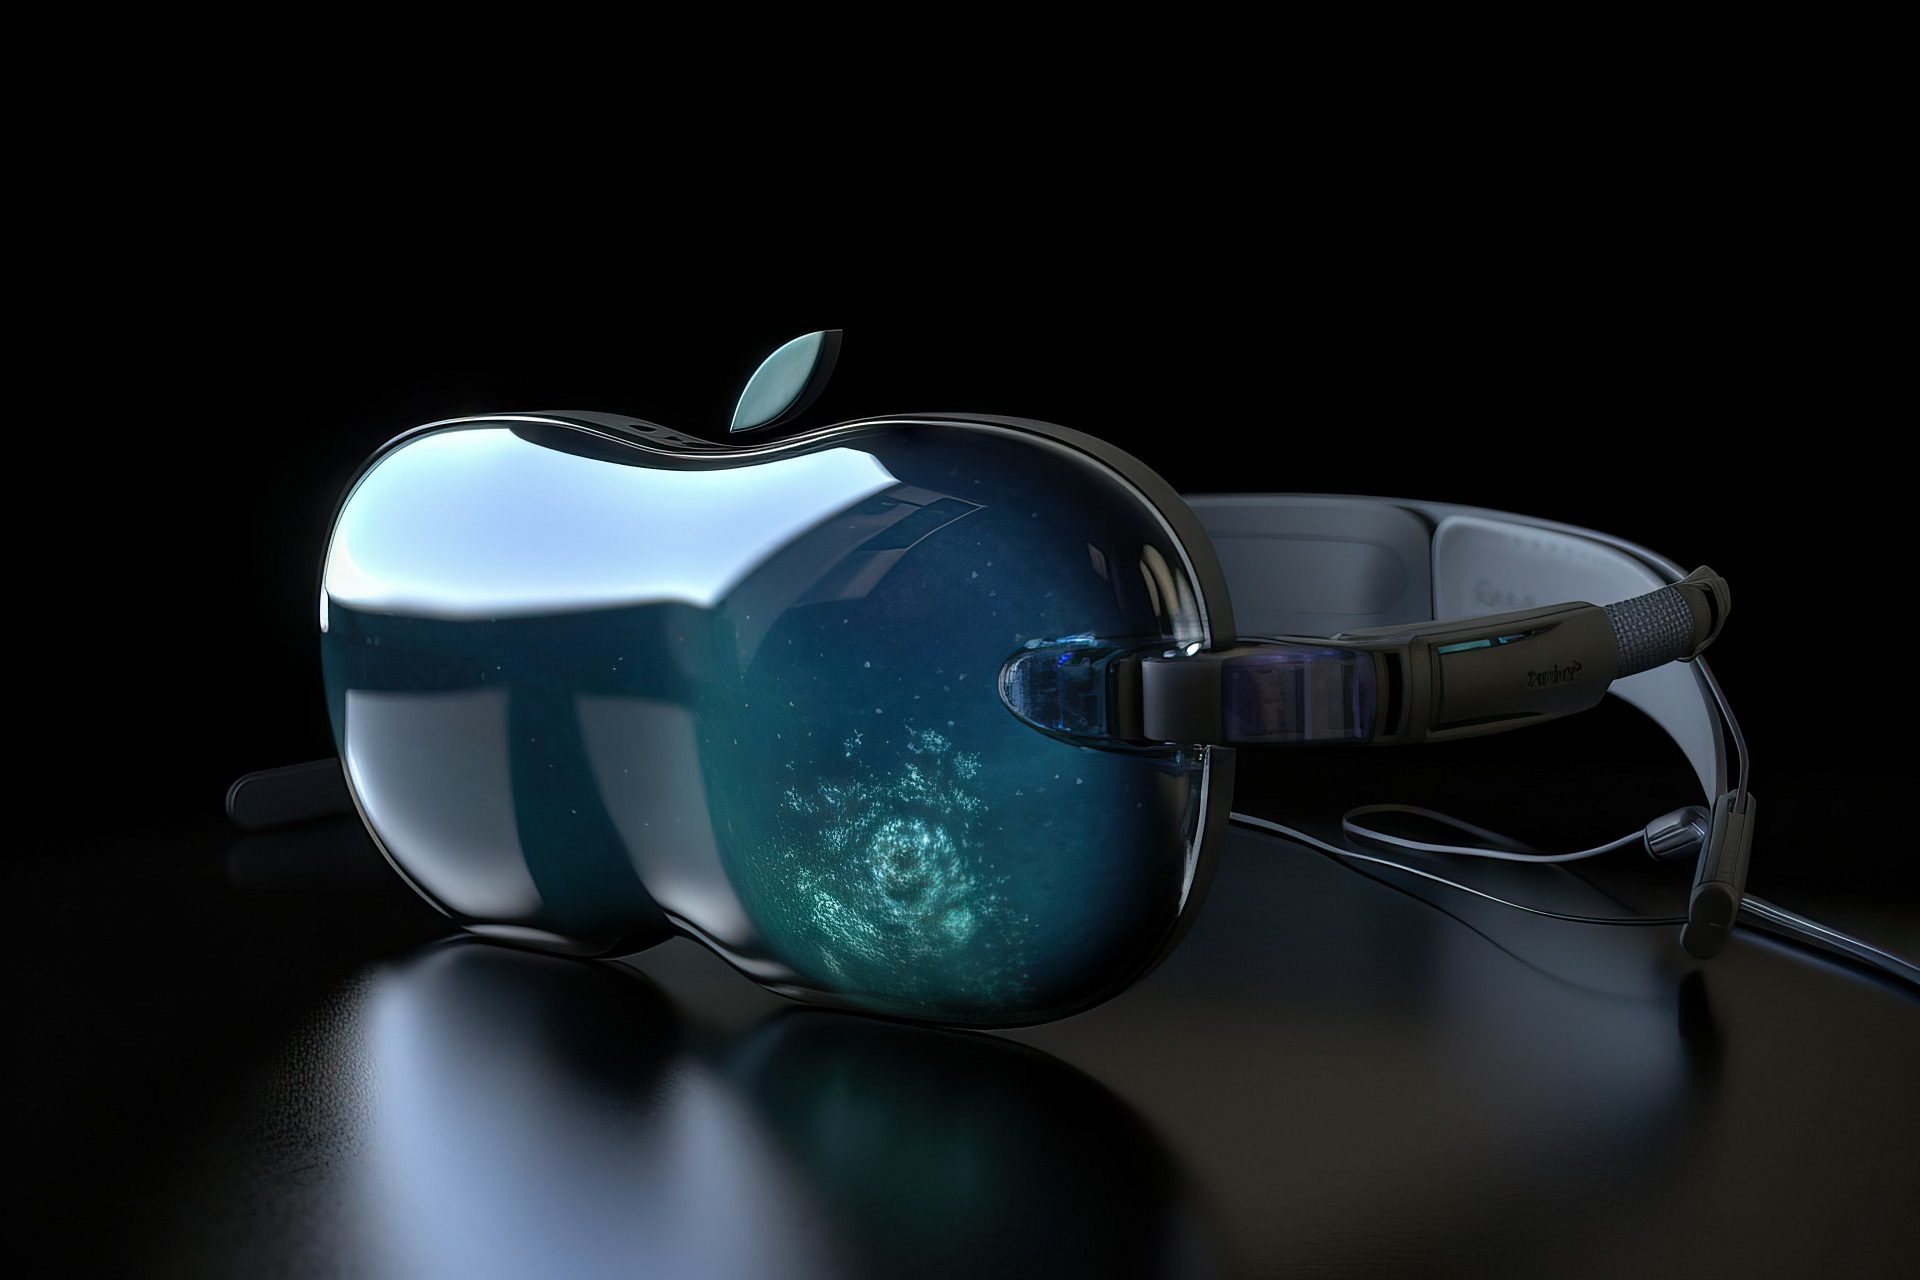 What Apple’s Vision Pro Headset Tells Us About The Future of the Internet | Bernard Marr